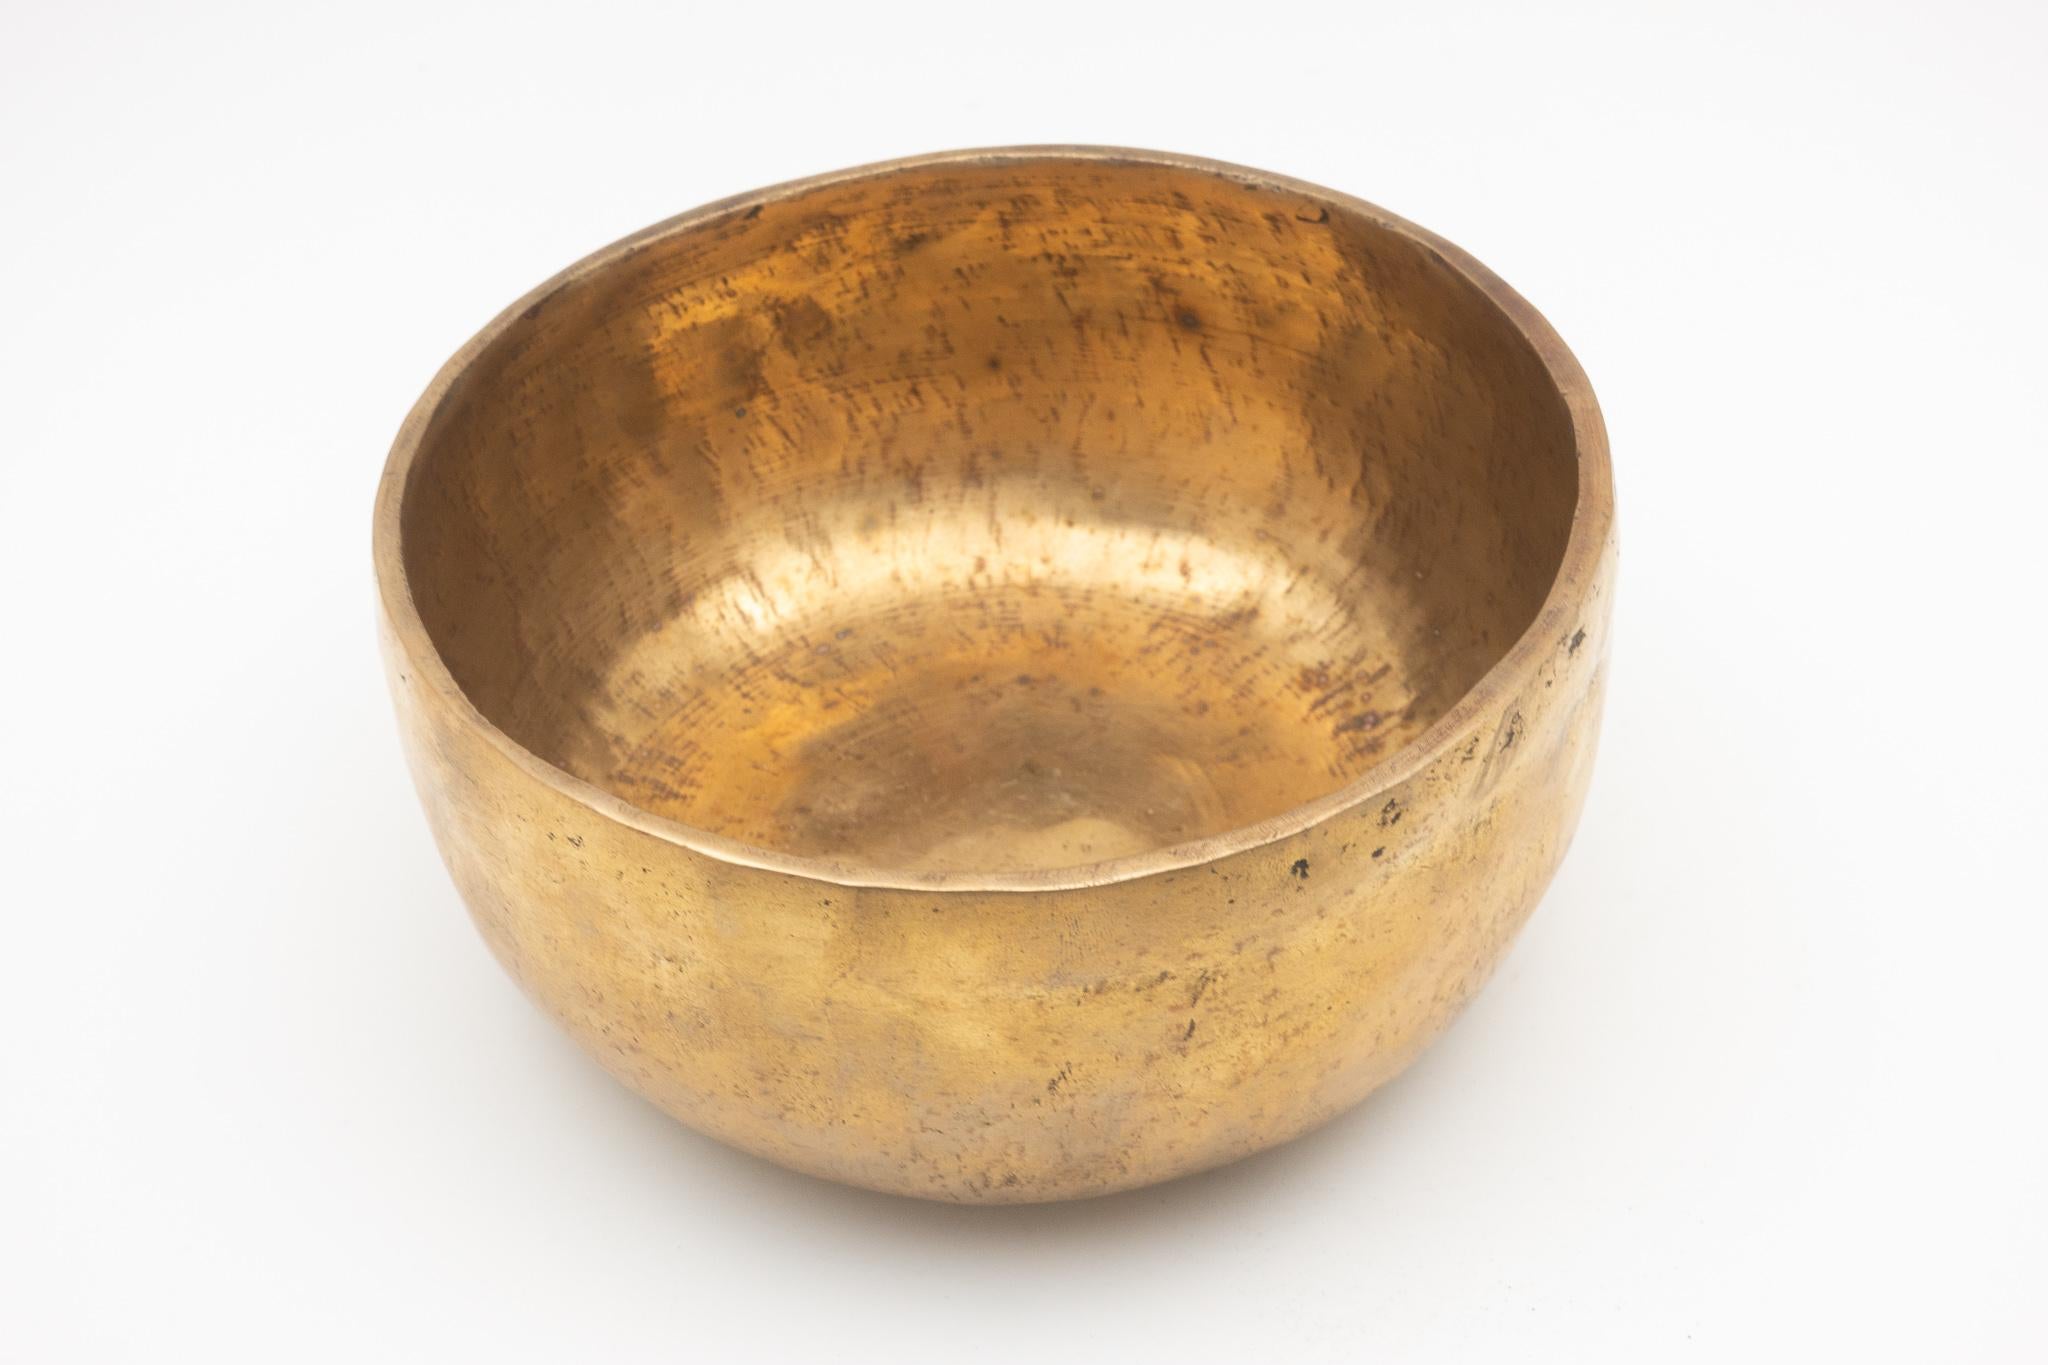 Antique bronze Tibetan singing bowl with wood and leather mallet/striker. Singing bowls. are used in some Buddhist religious practices to accompany periods of meditation and chanting. They are widely used for music making, meditation and relaxation,